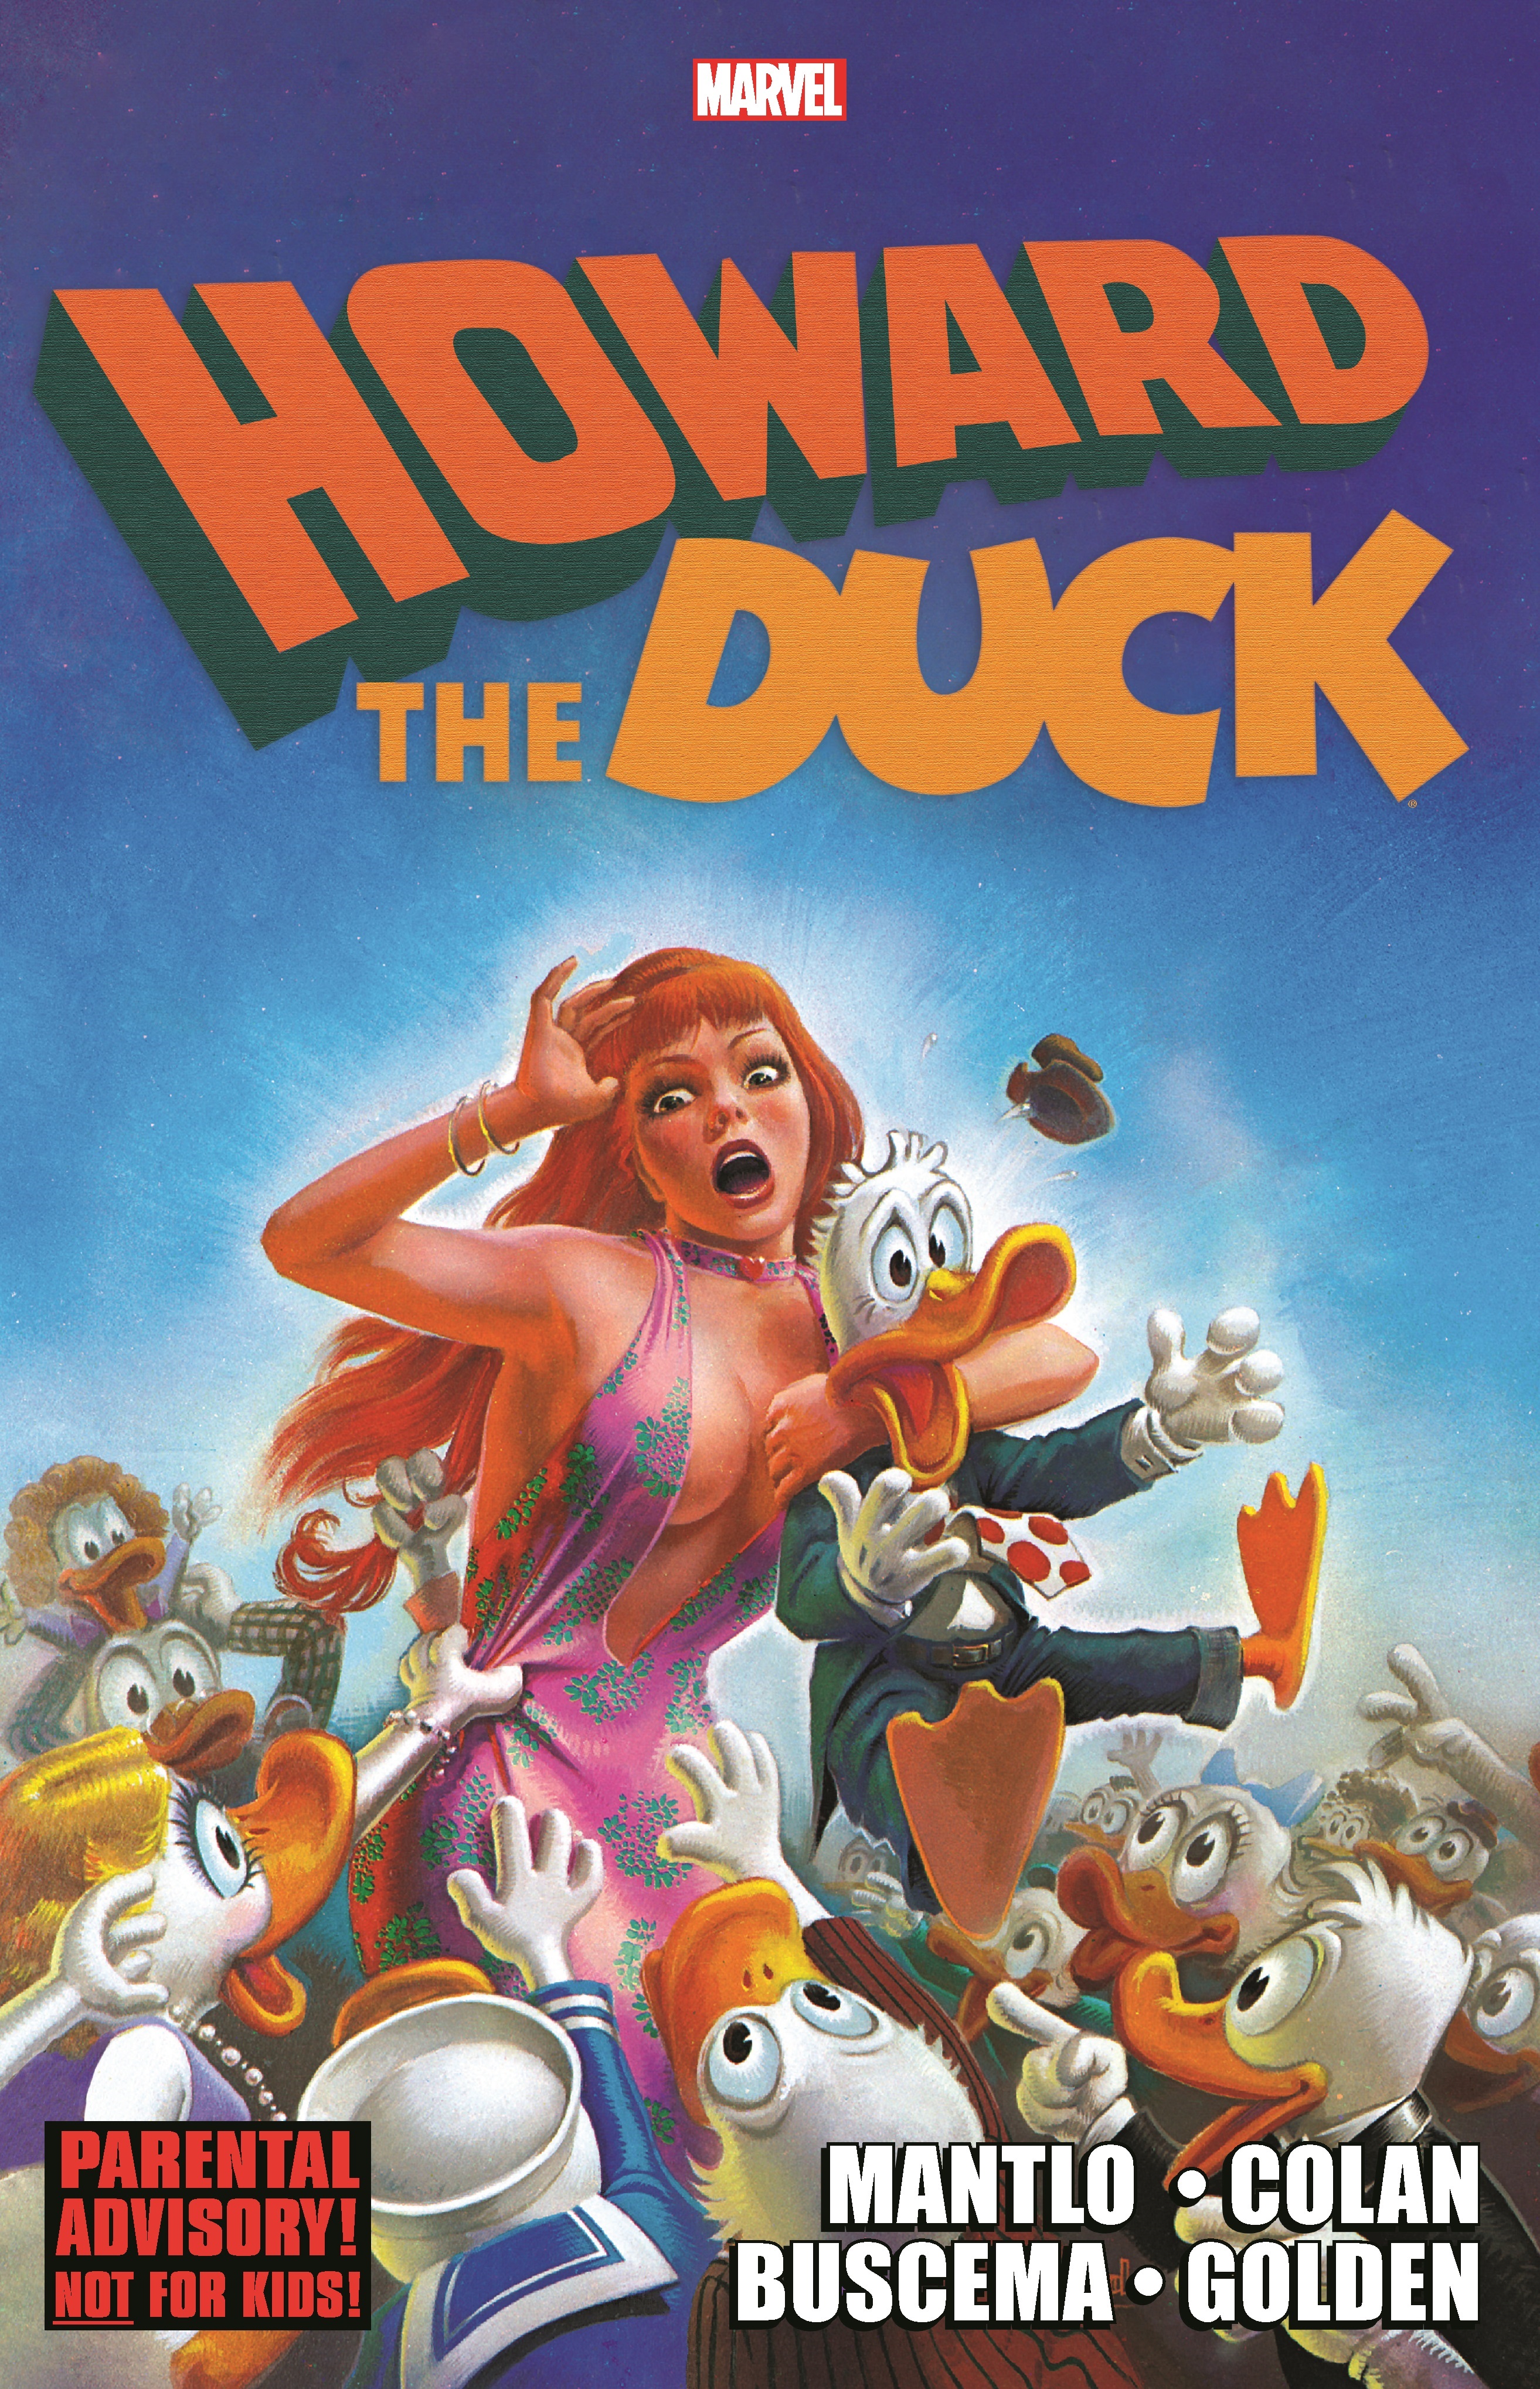 Howard The Duck: The Complete Collection Vol. 3 (Trade Paperback)